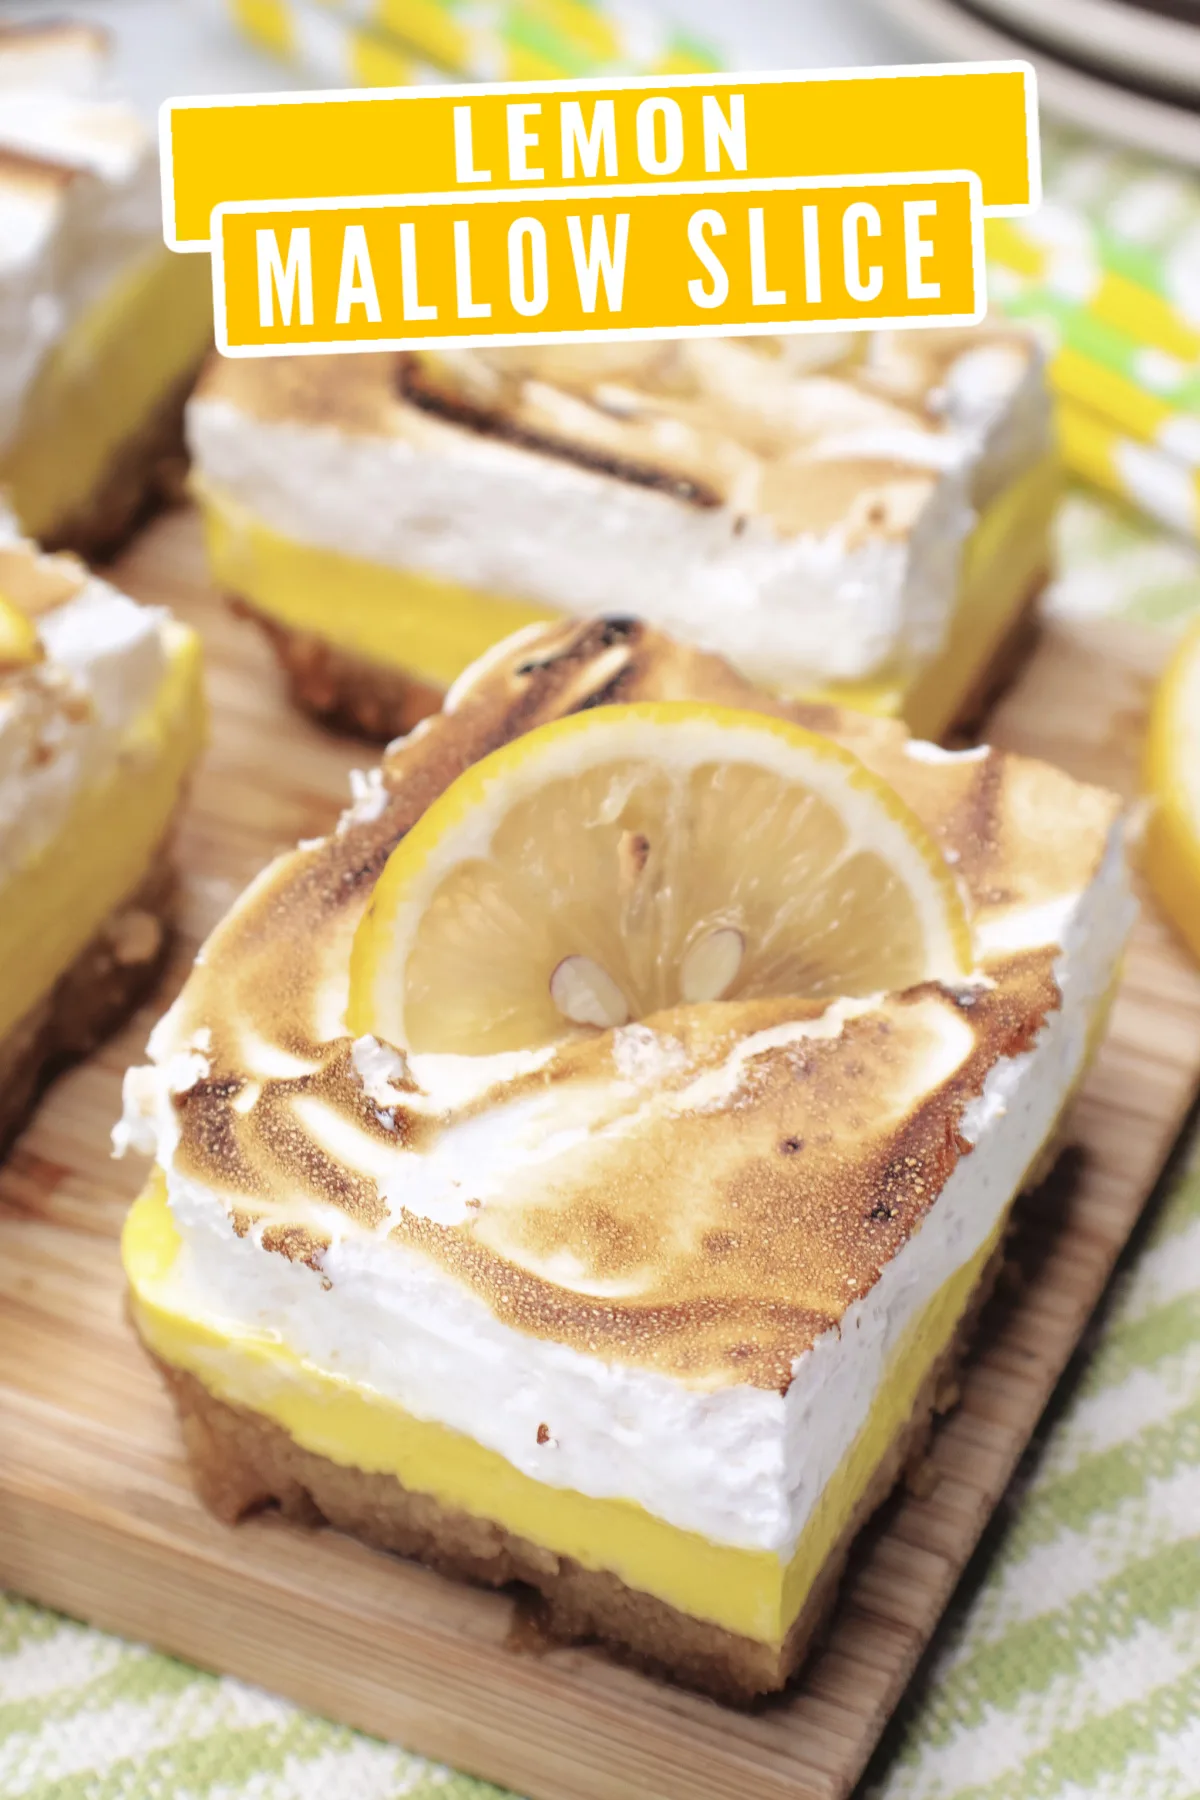 Try out this delicious lemon marshmallow slice recipe that's sure to be a hit for any occasion. It's fluffy, sweet and perfectly tangy.